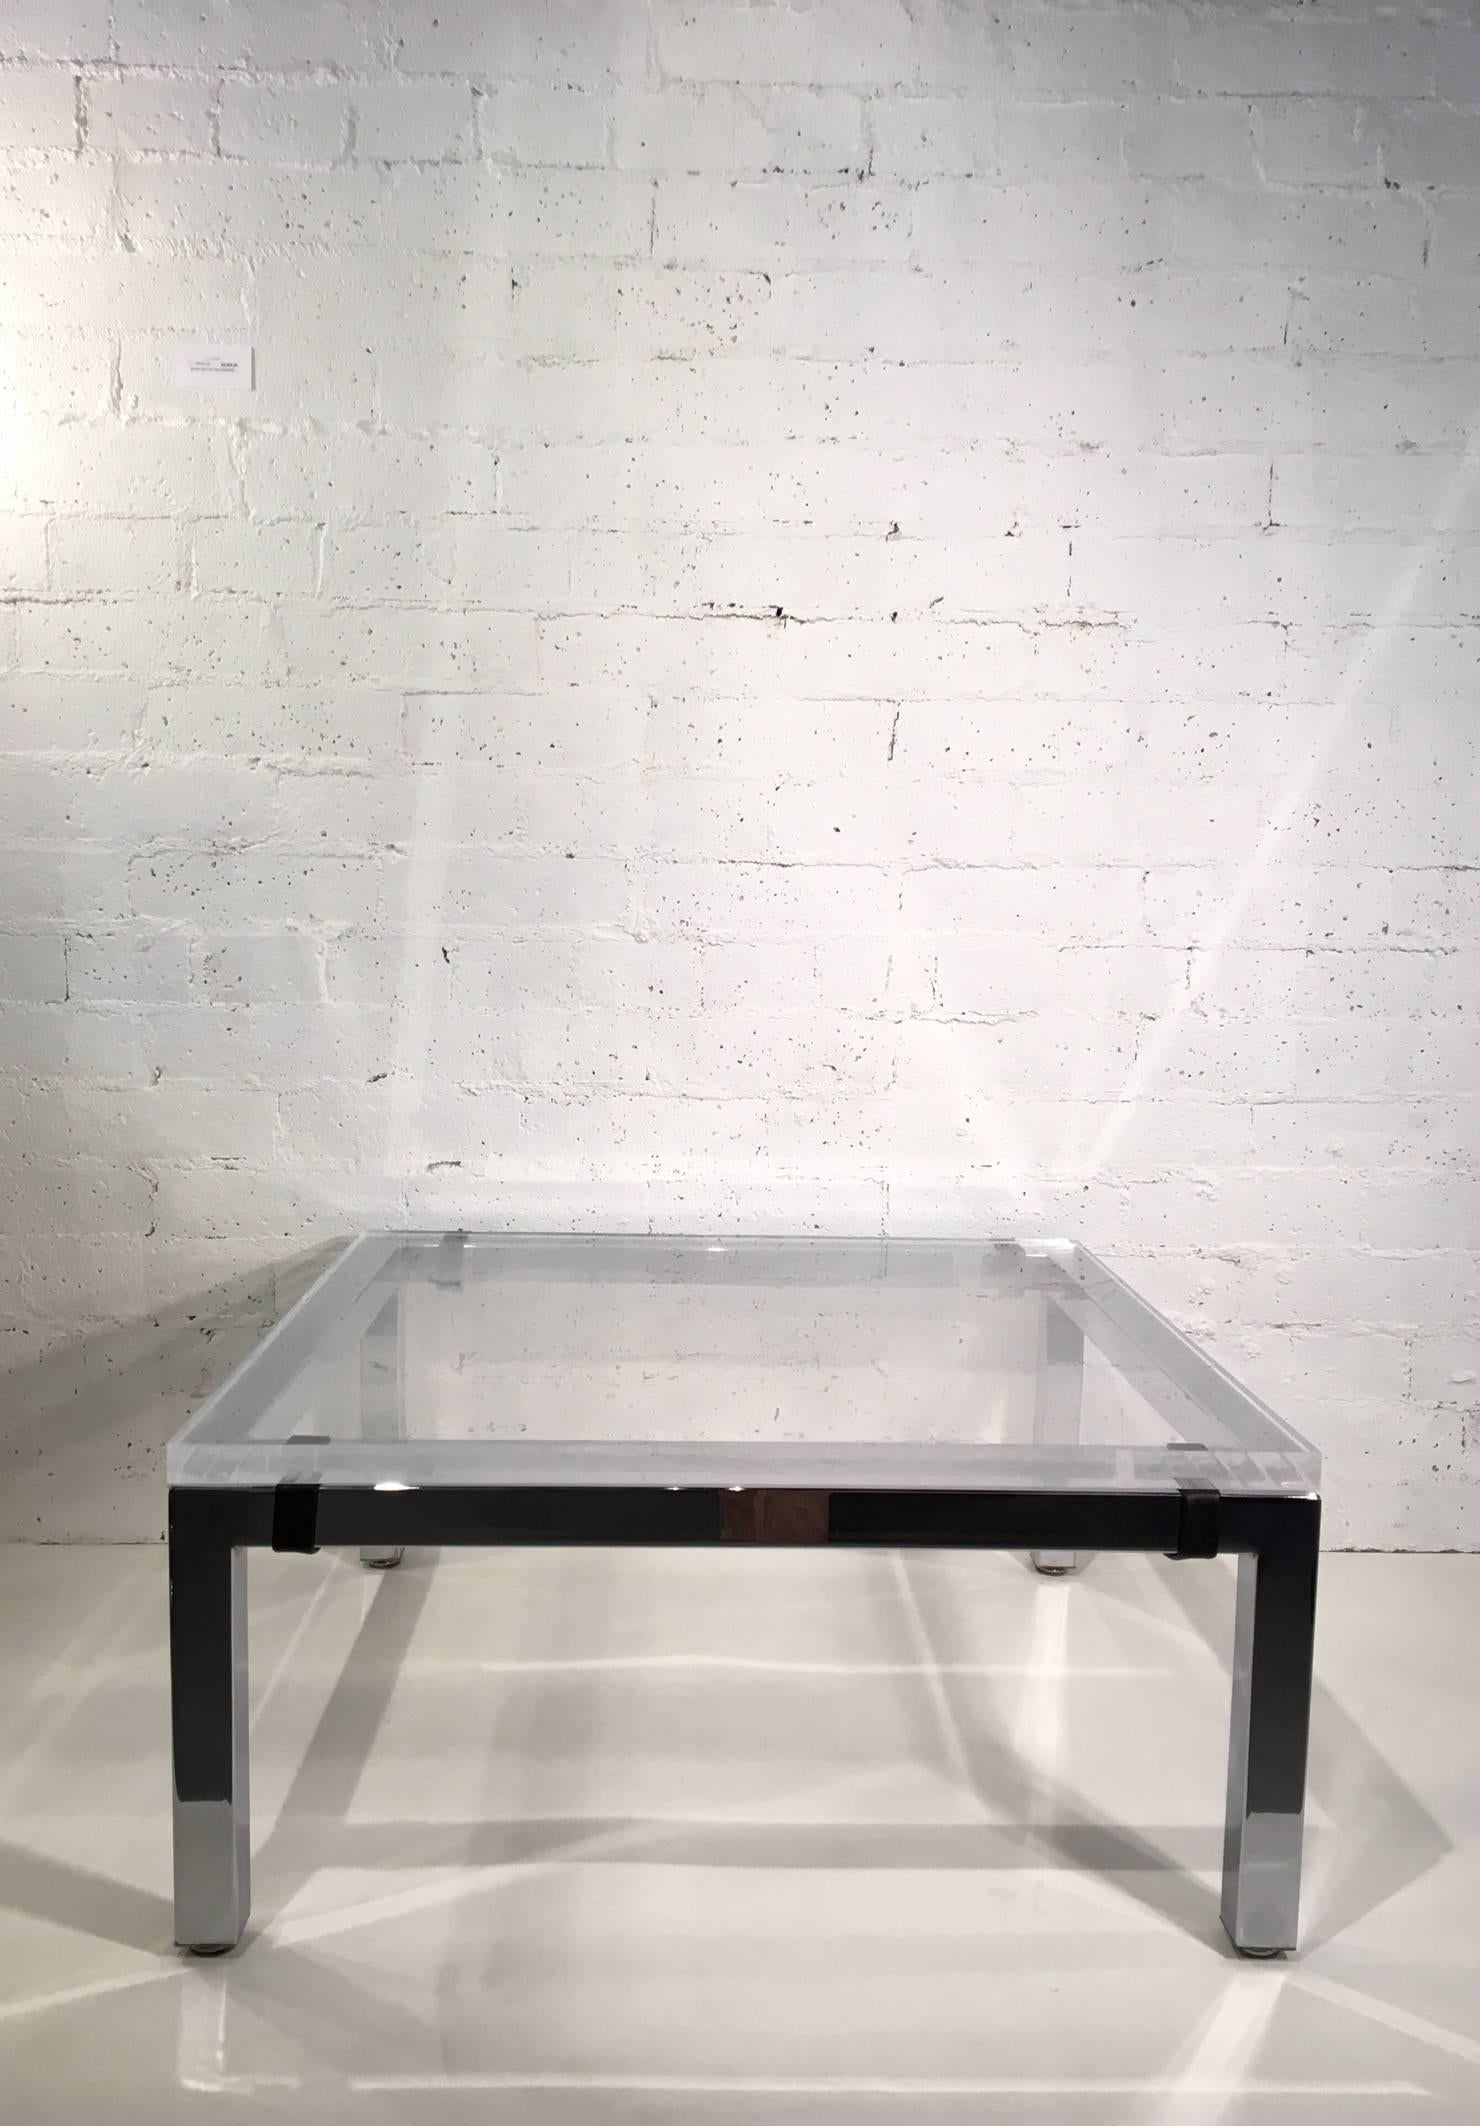 An early 1960s chrome cocktail table designed by Charles Hollis Jones.
The crome is polished chrome with black leather straps that protect the 1.25